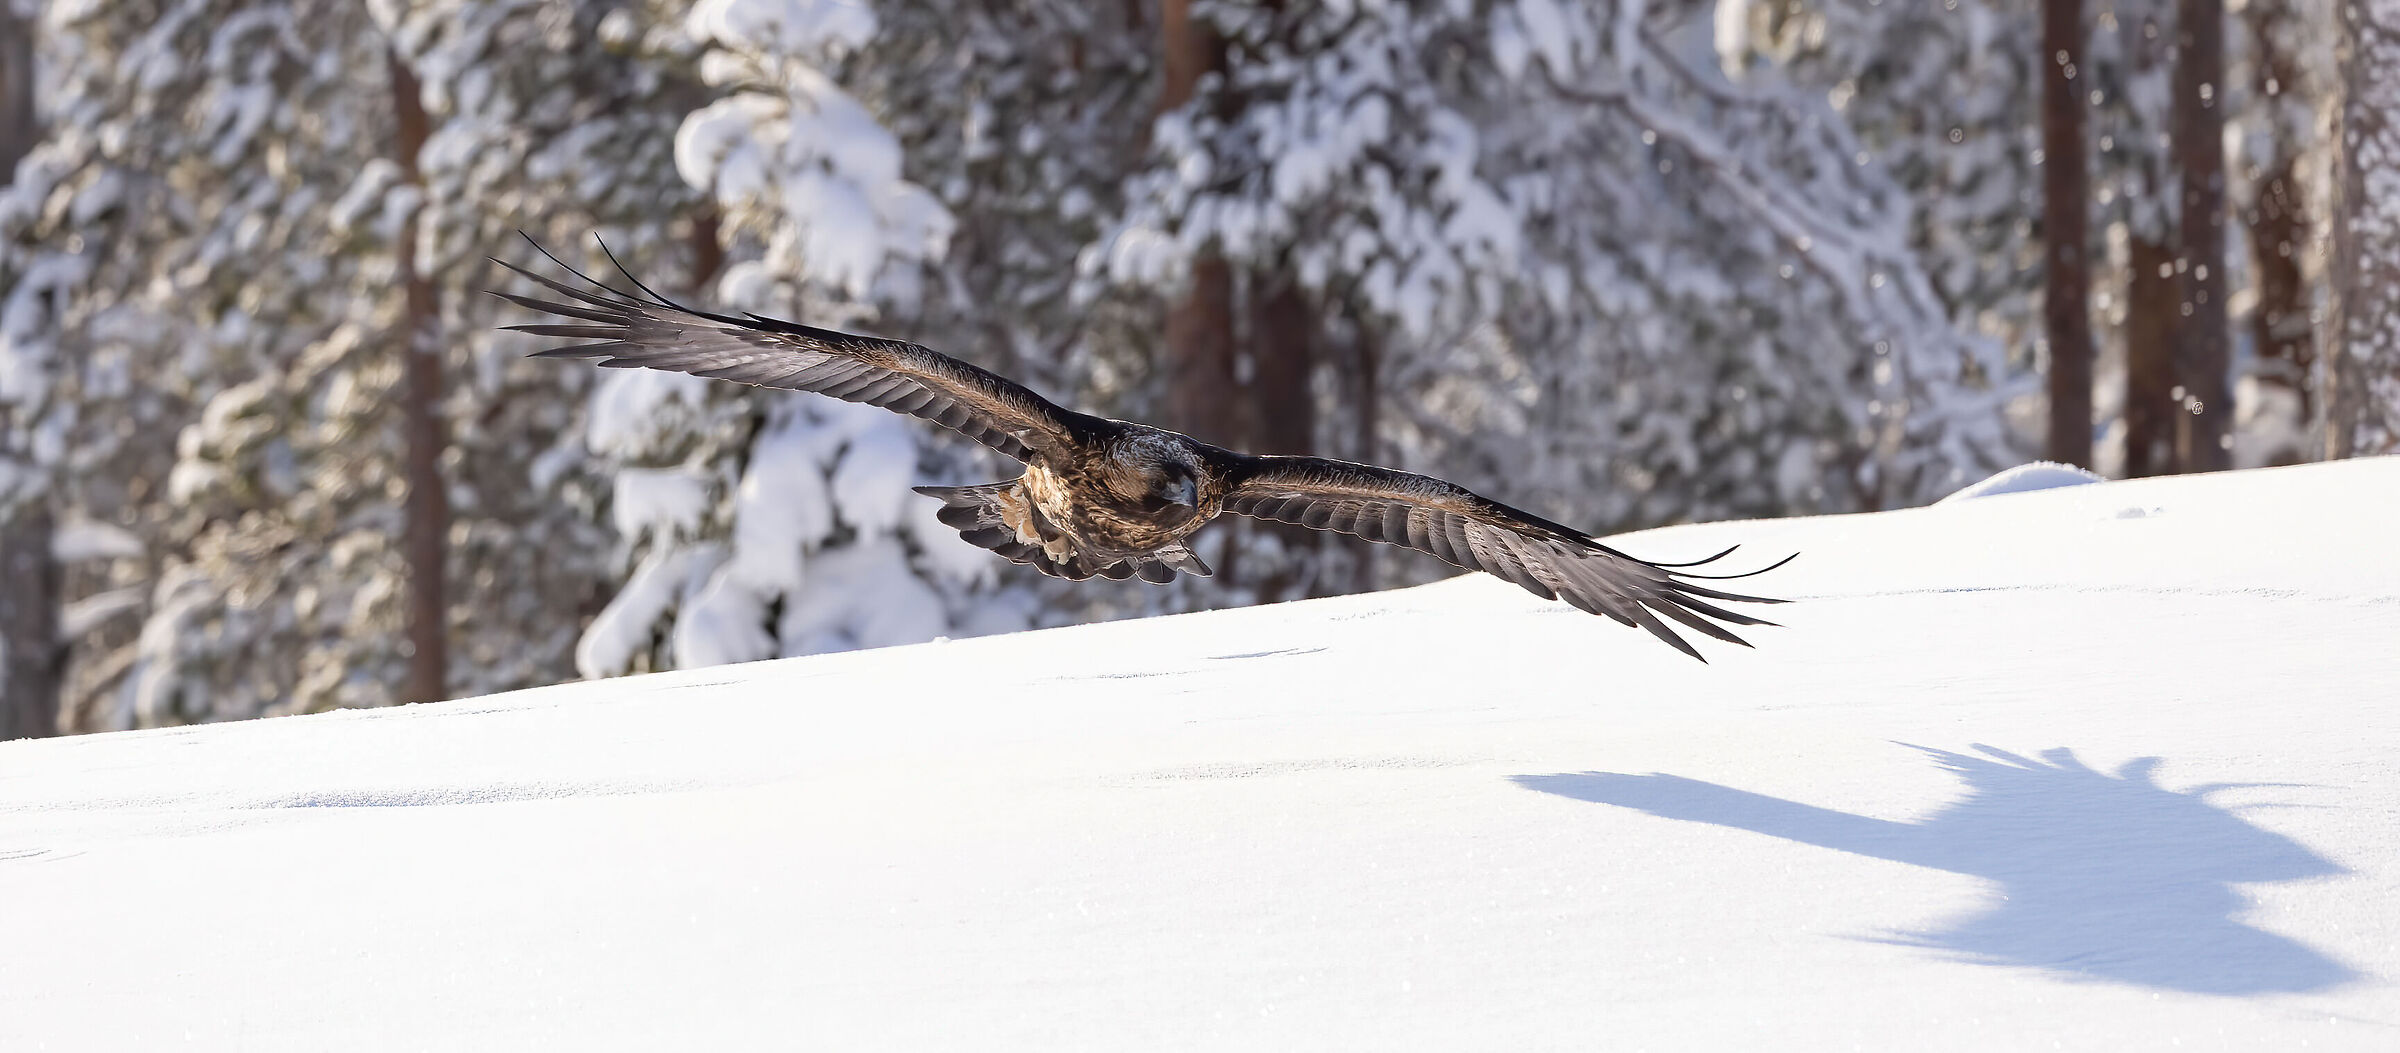 Shade on the snow - Golden eagle...